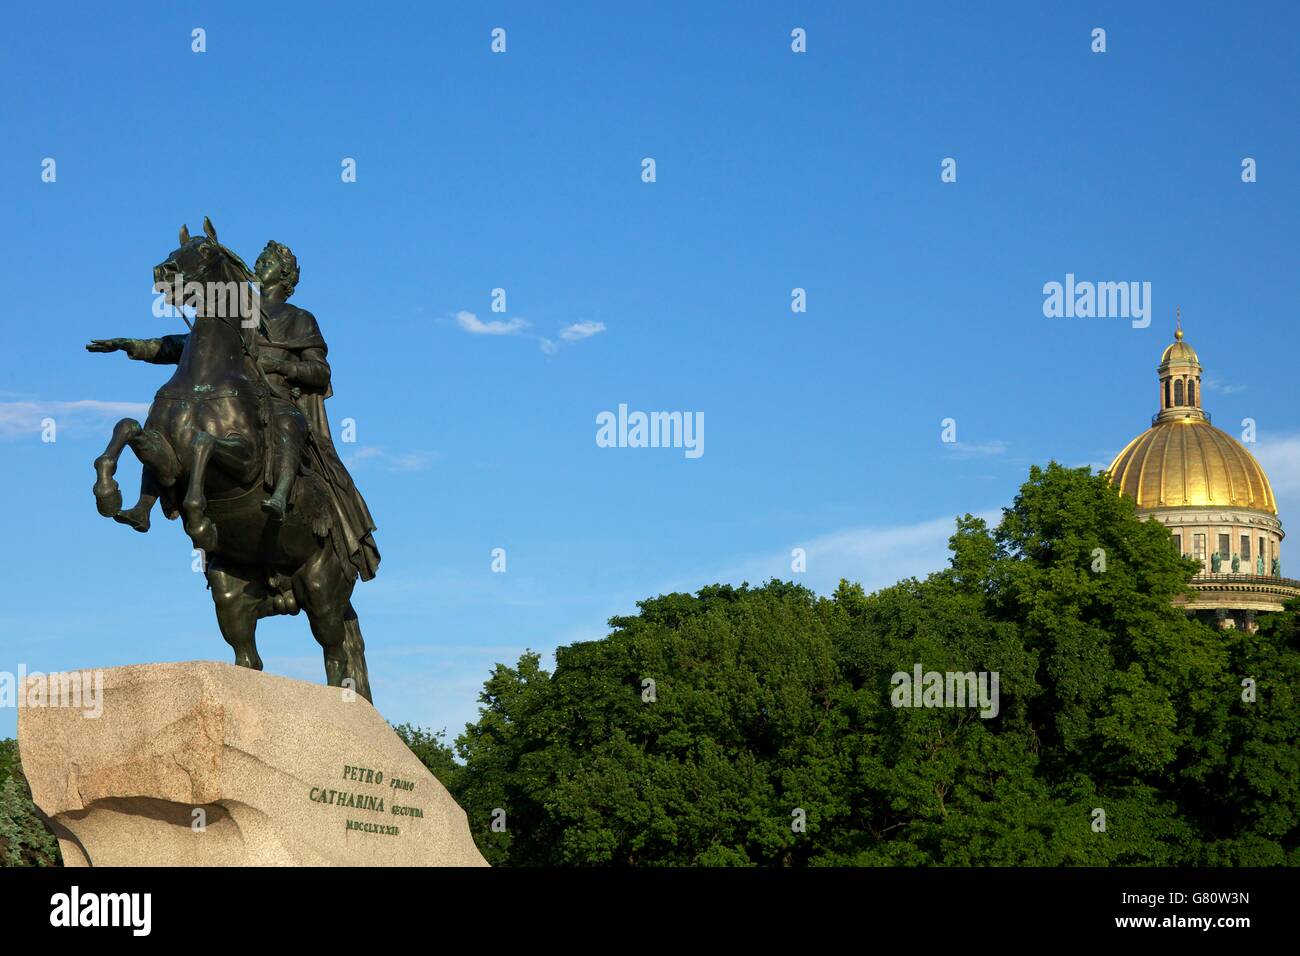 Statue of Peter the Great and dome of St Isaac's Cathedral, Bronze Horseman, St Petersburg, Russia Stock Photo